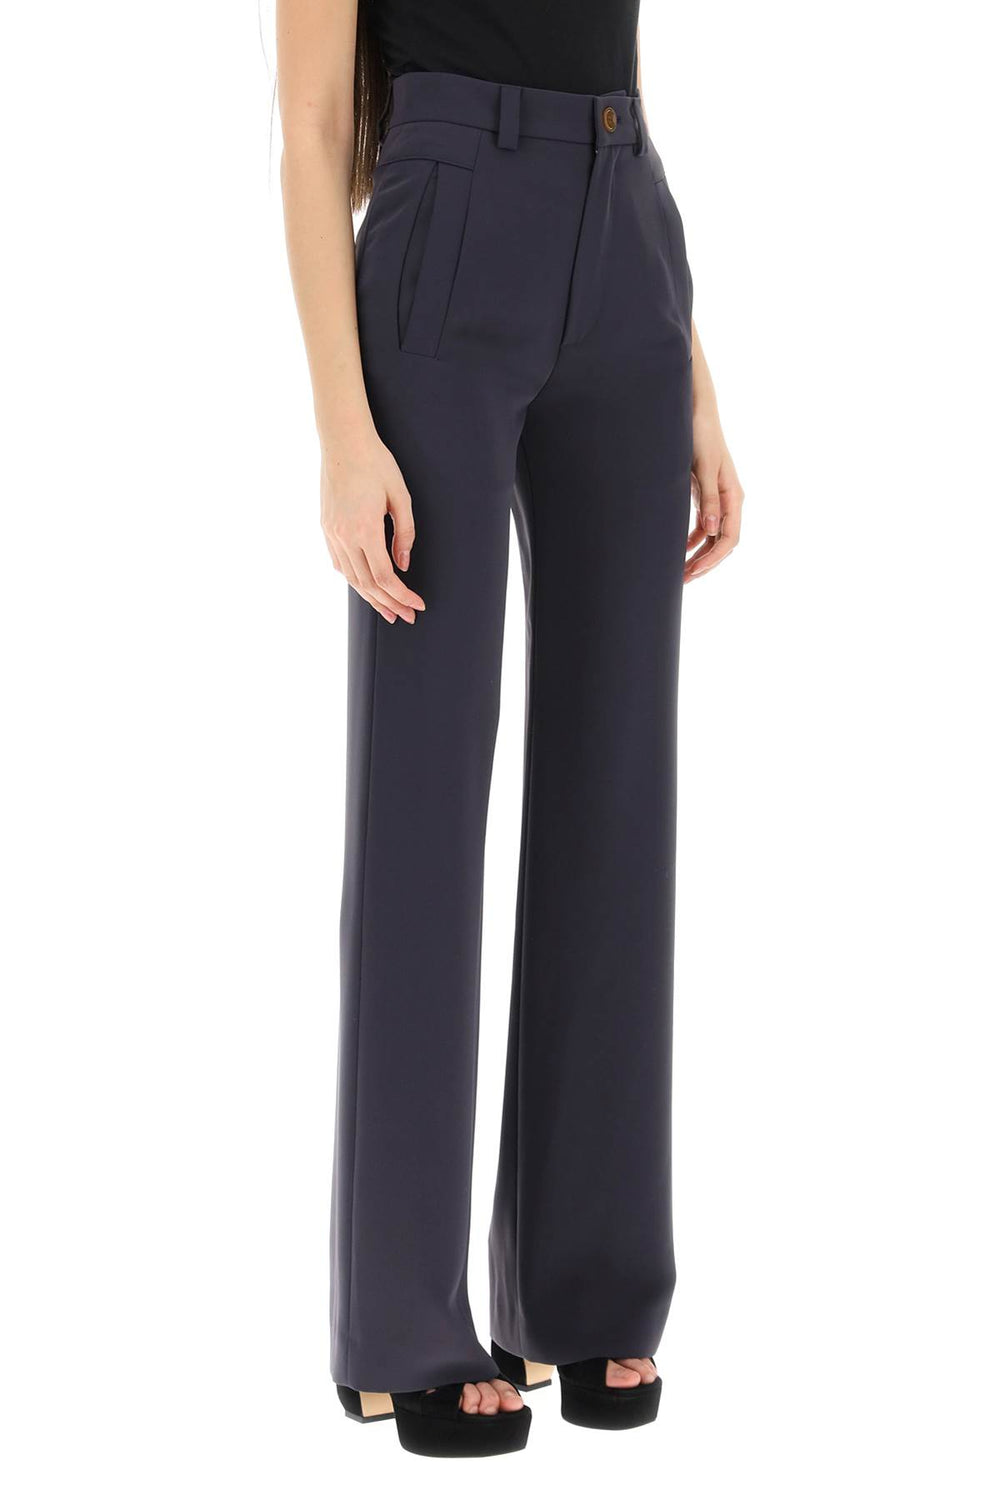 Vivienne westwood 'ray' trousers in recycled cady-1